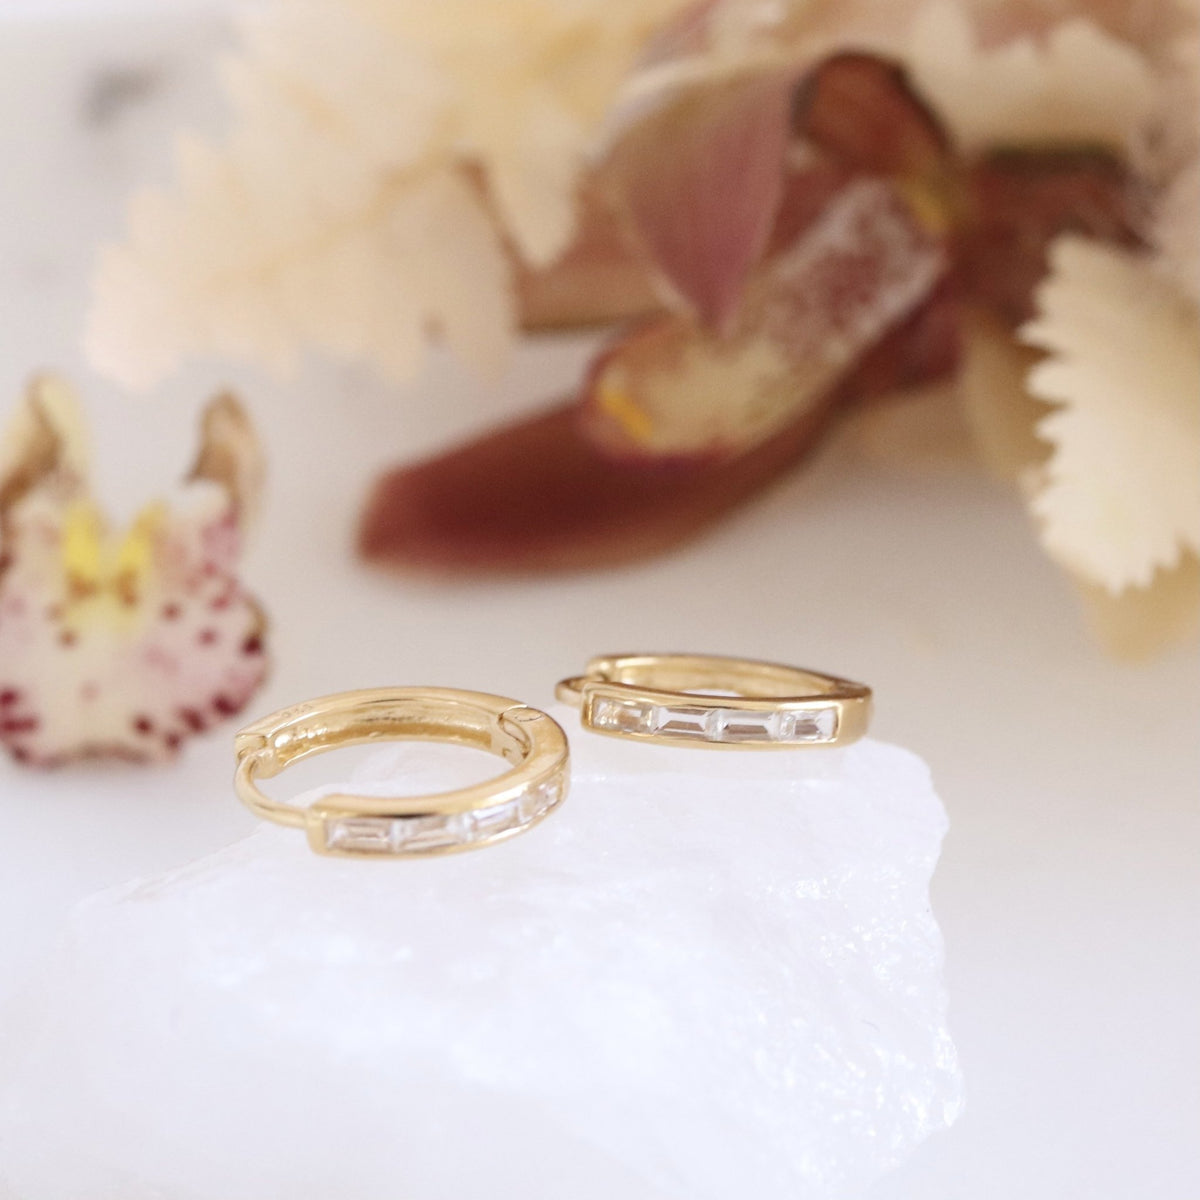 Loyal Channel Huggie Hoops - White Topaz &amp; Gold - SO PRETTY CARA COTTER